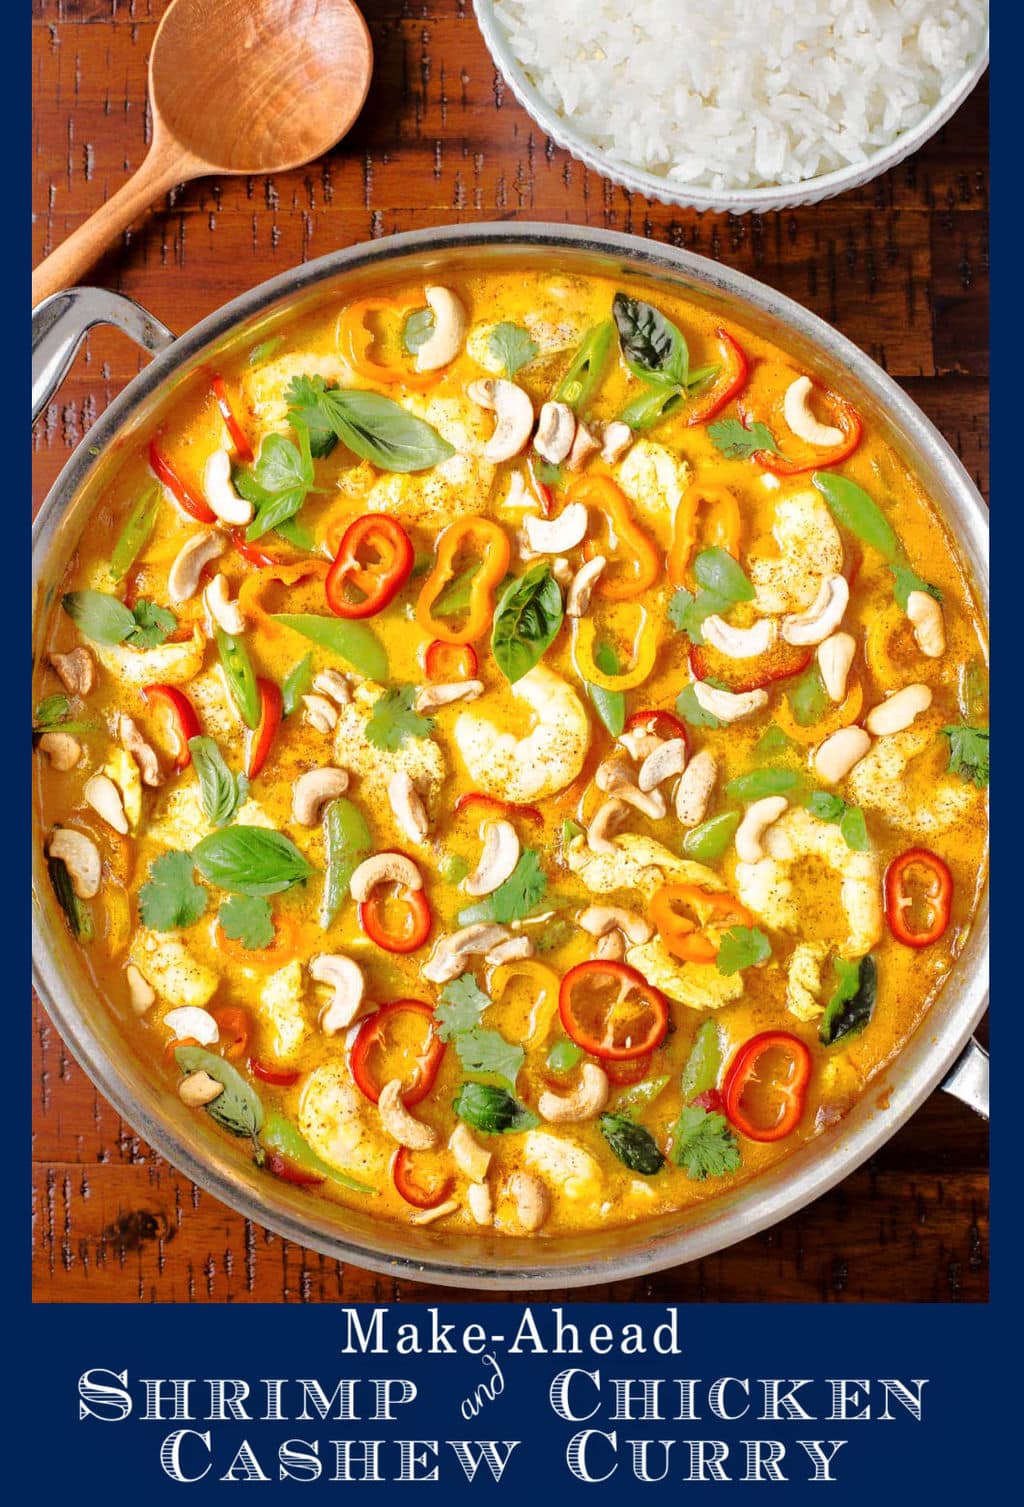 Make-Ahead Shrimp and Chicken Cashew Curry